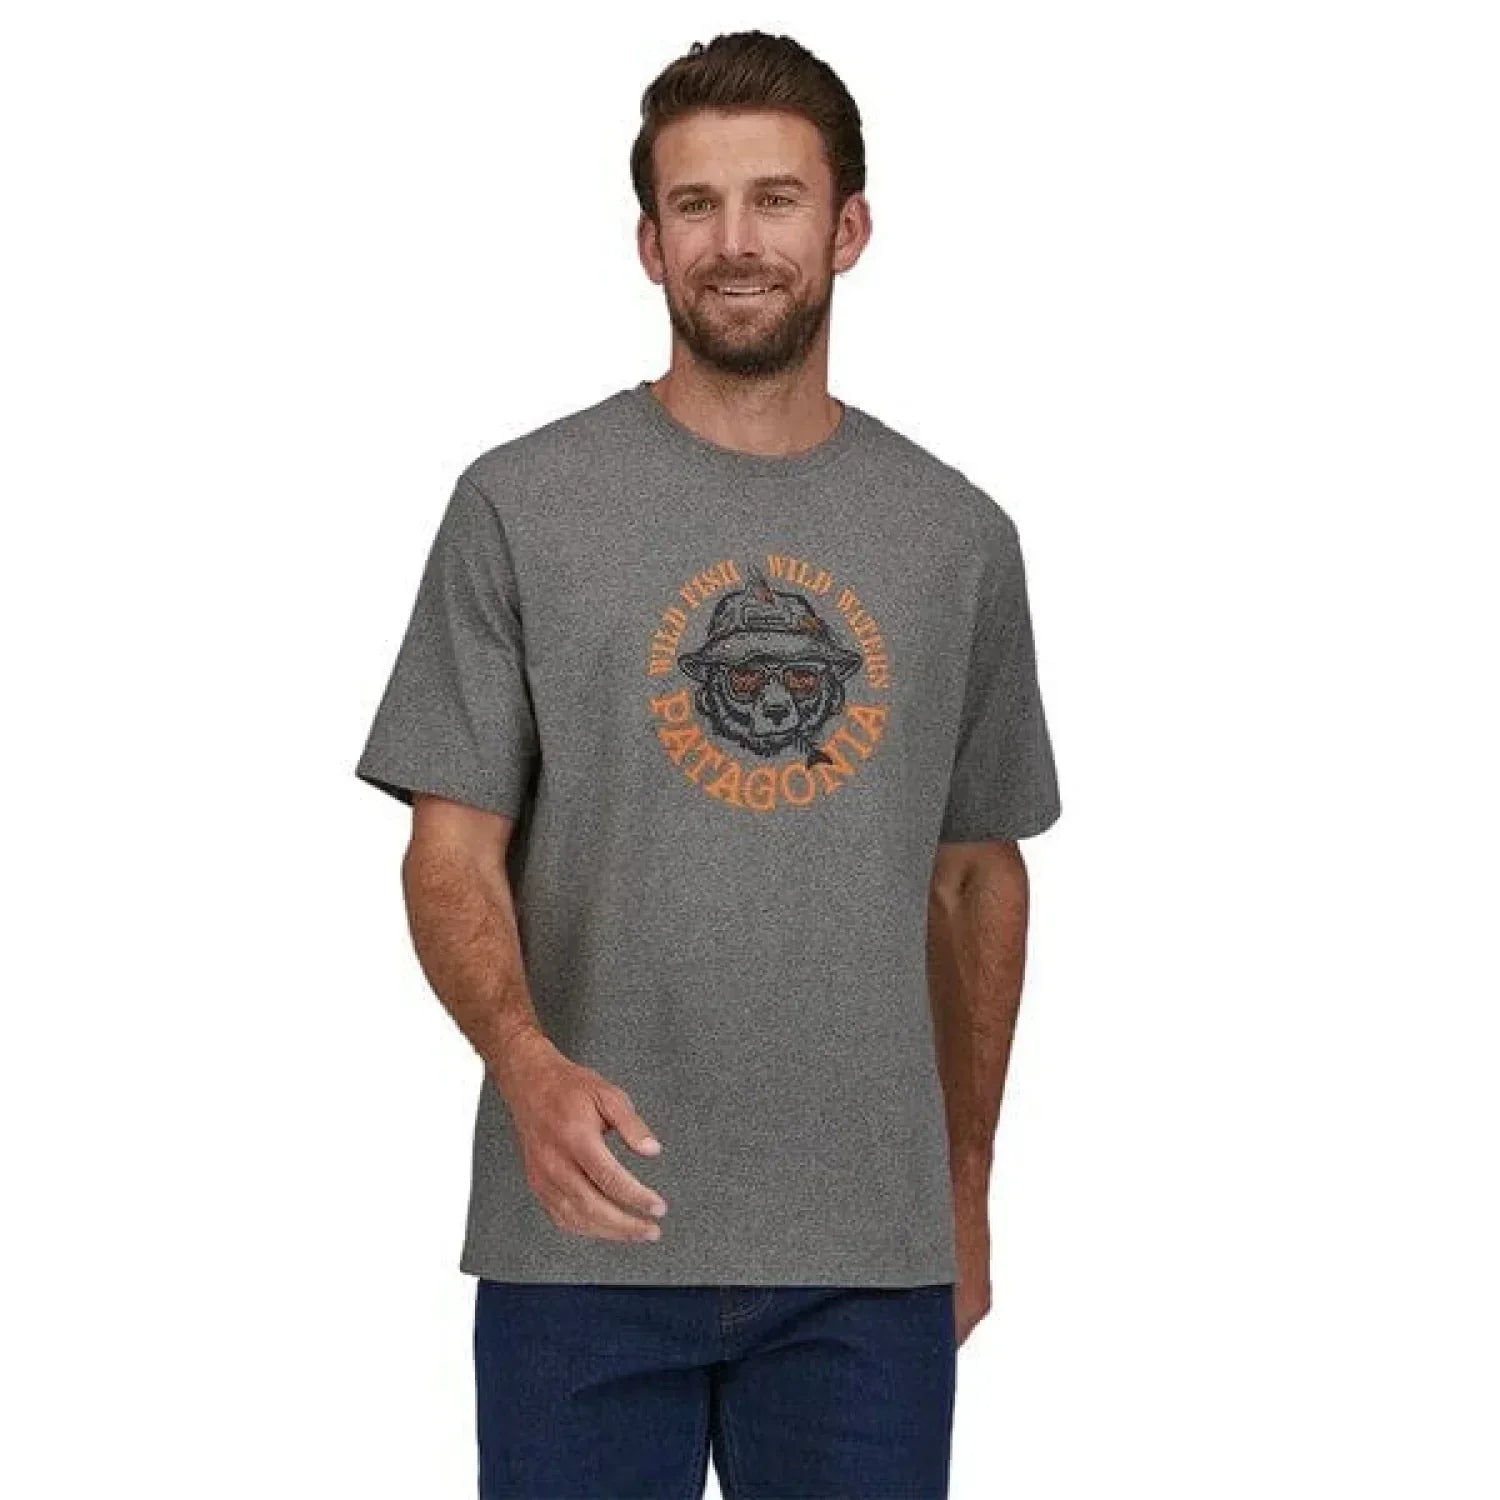 Patagonia 01. MENS APPAREL - MENS T-SHIRTS - MENS T-SHIRT SS Men's Take A Stand Responsibili-Tee WISC WILD GRIZZ|SIENNA CLAY